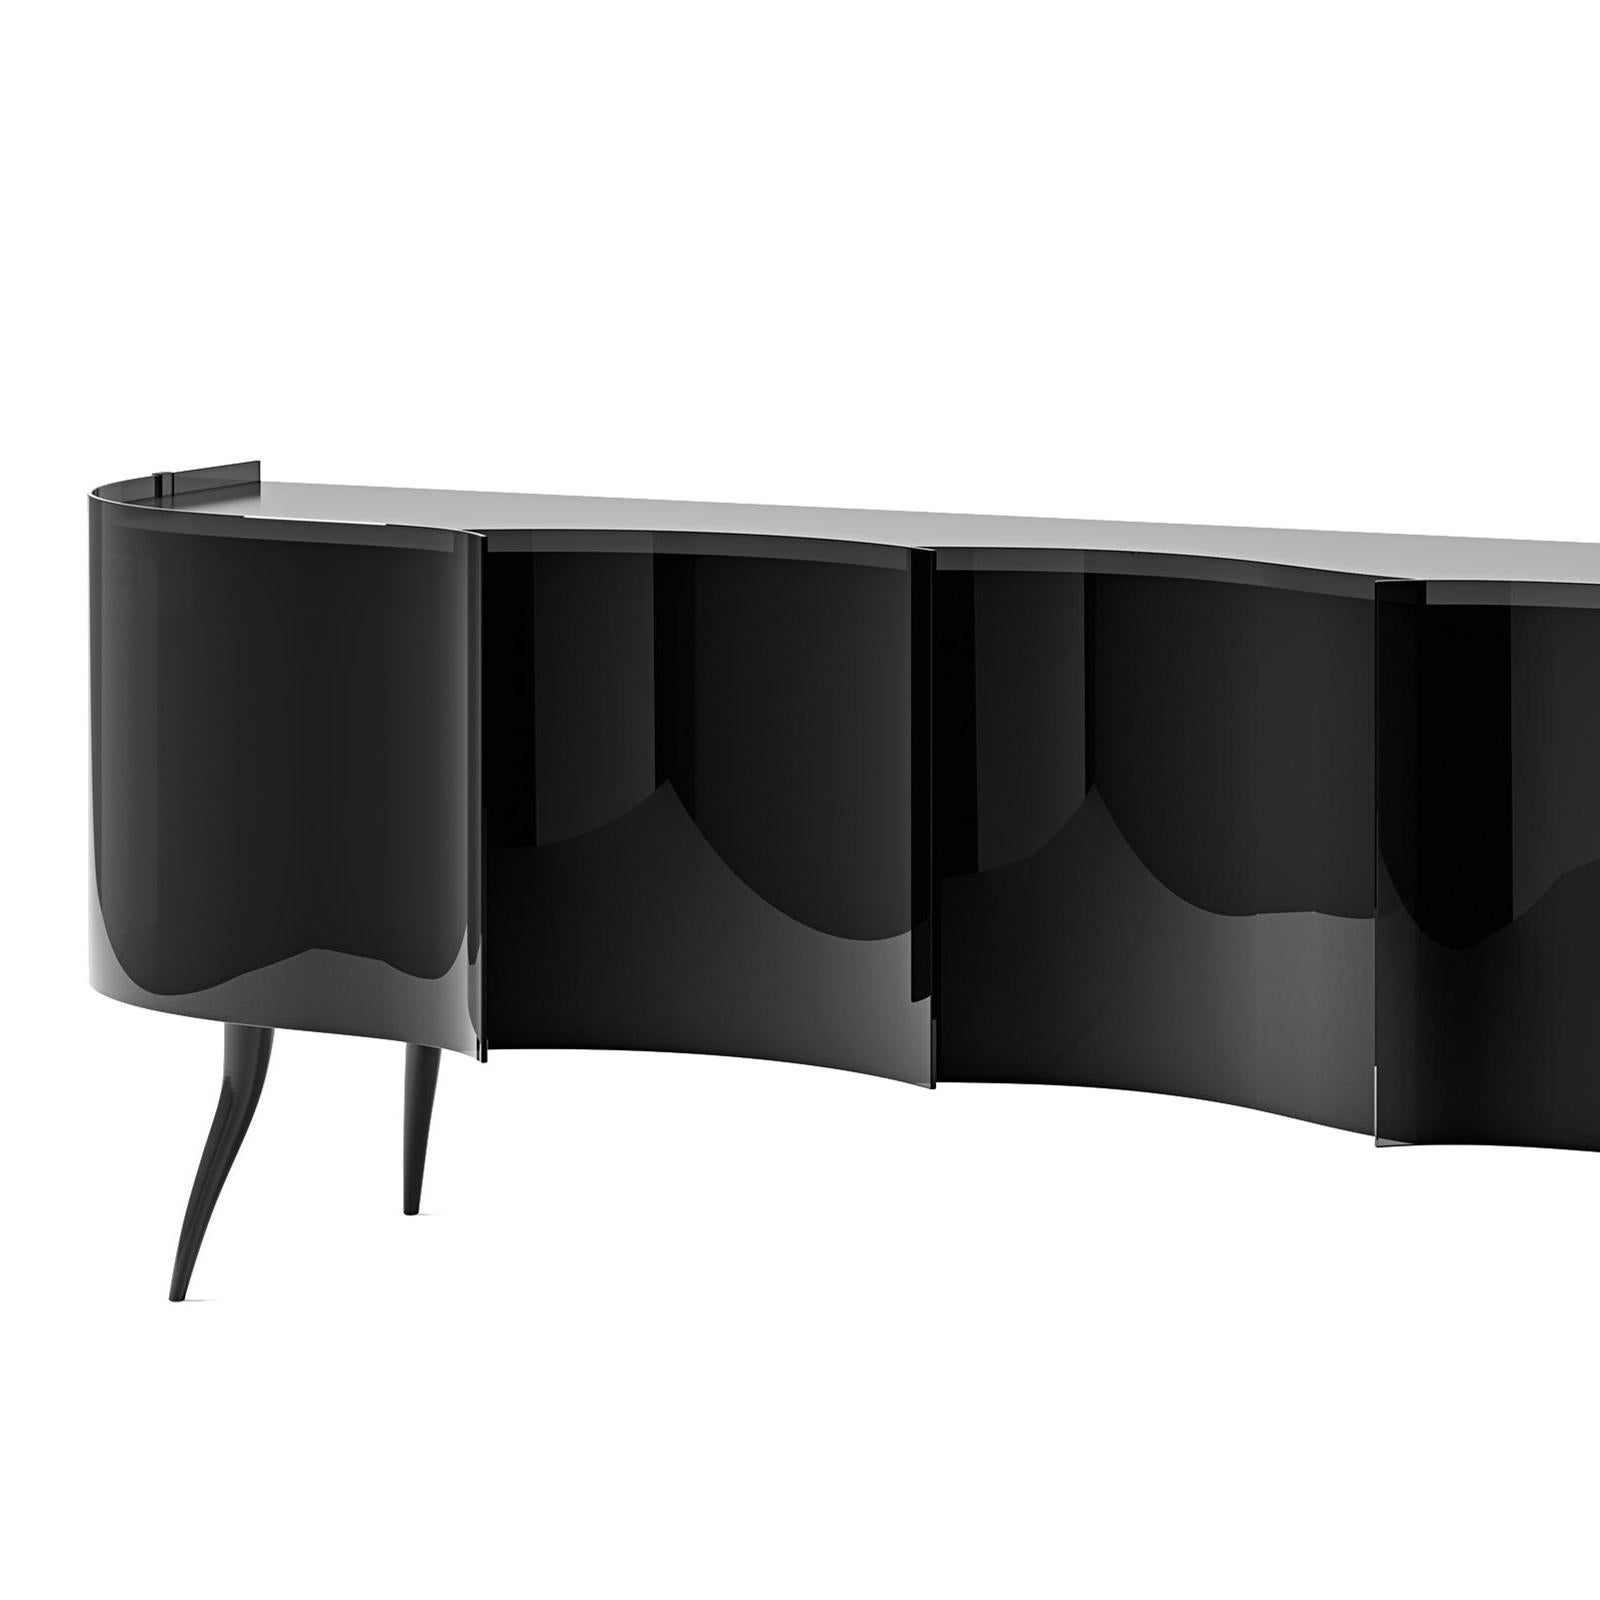 Sideboard black waves with structure in solid wood
in glossy finish. Doors and front parts in smoked tempered
glass and frames in blackened painted metal.